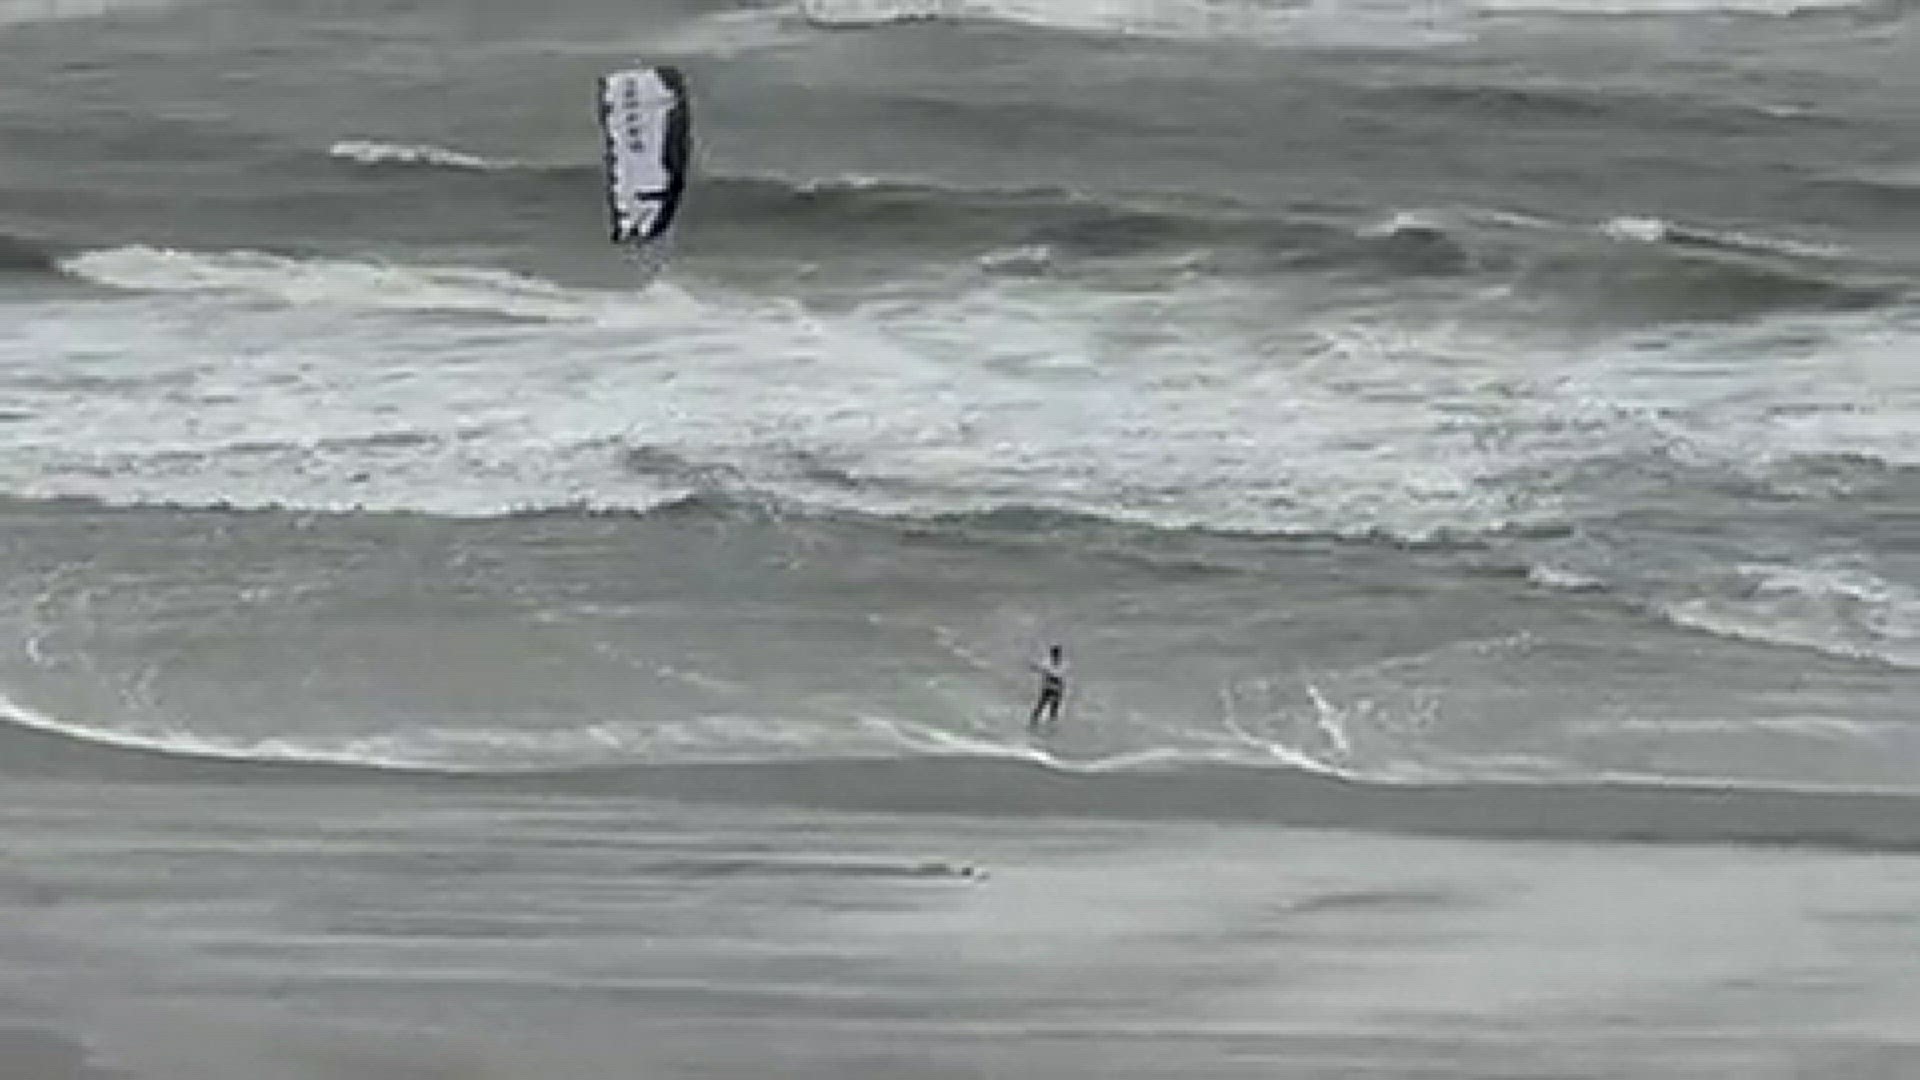 Kite surfing on Jacksonville Beach. Video courtesy Troy
Credit: Troy